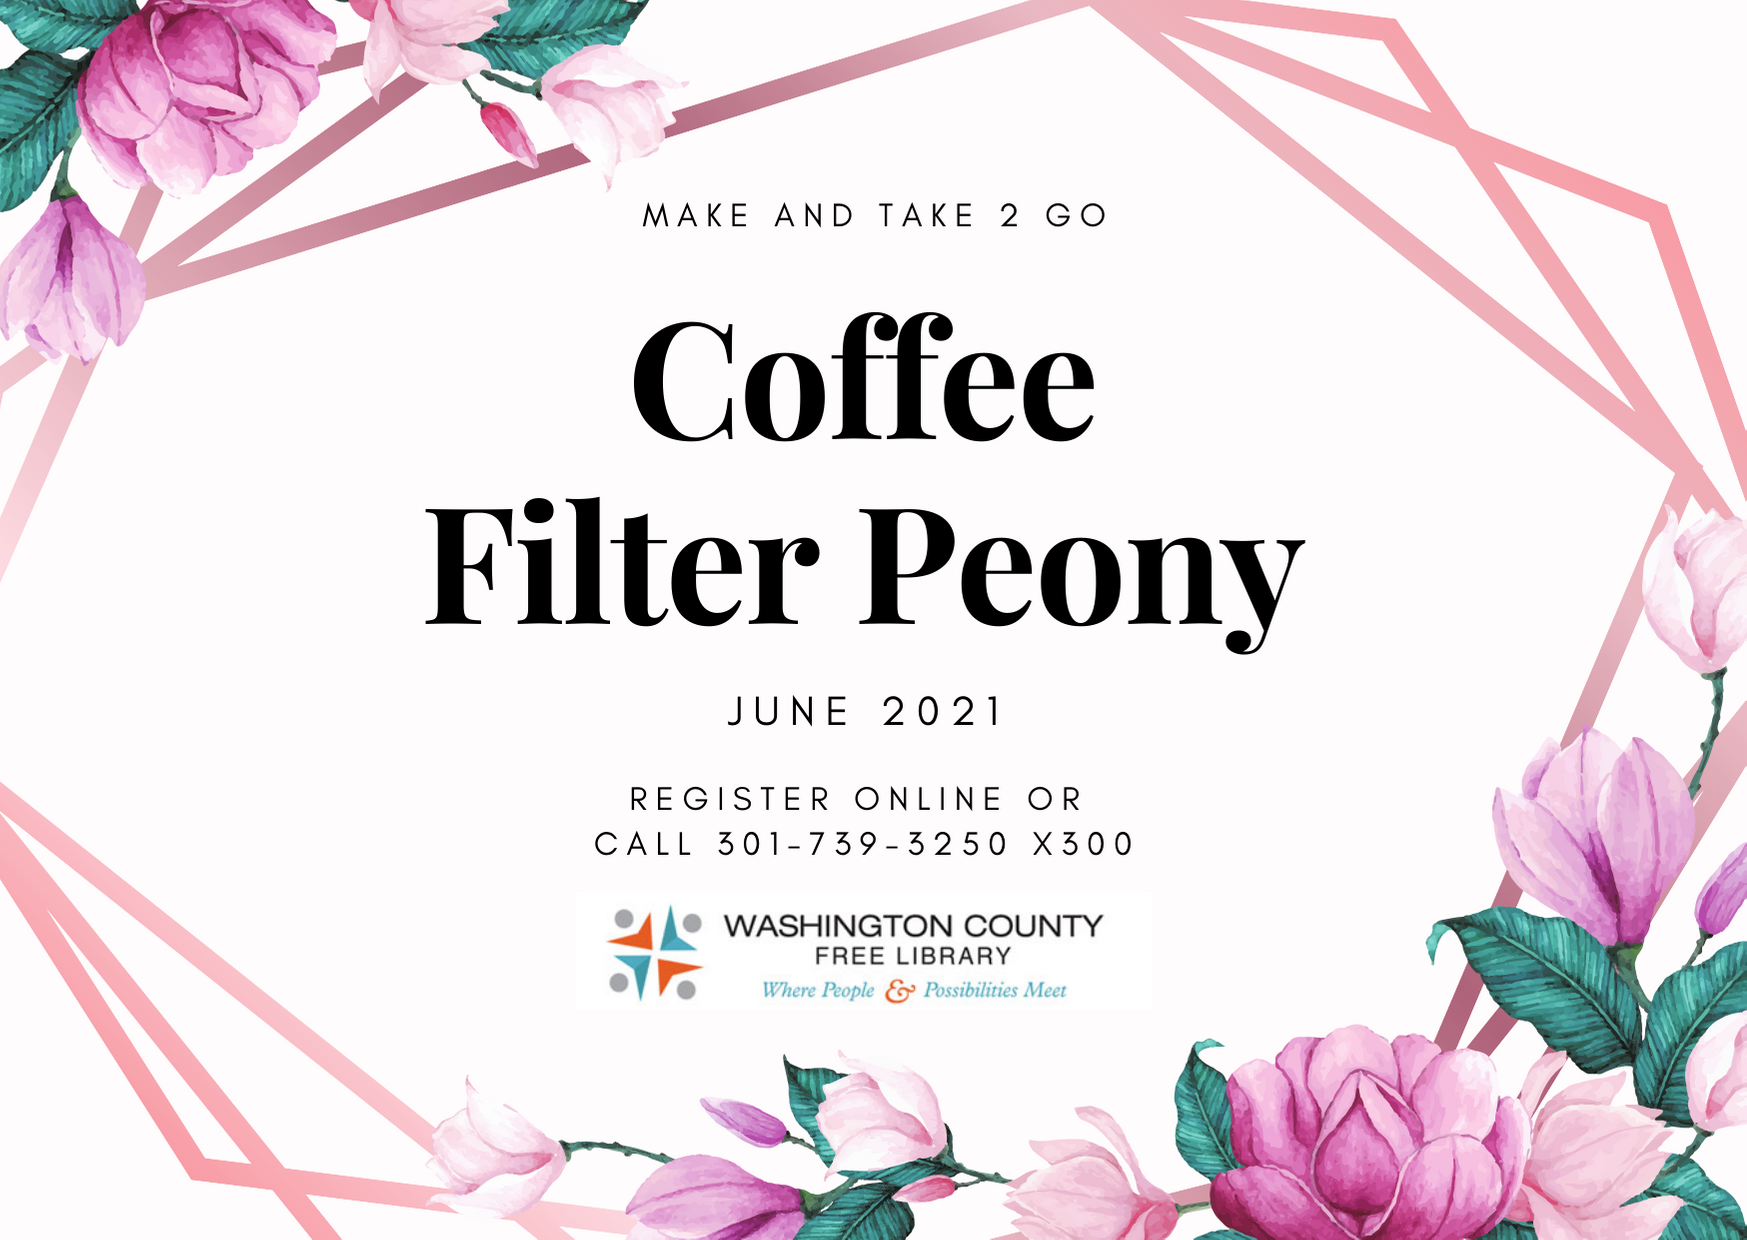 Make and Take 2 Go Coffee Filter Peony June 2021 Register online or call 301-739-3250 x300